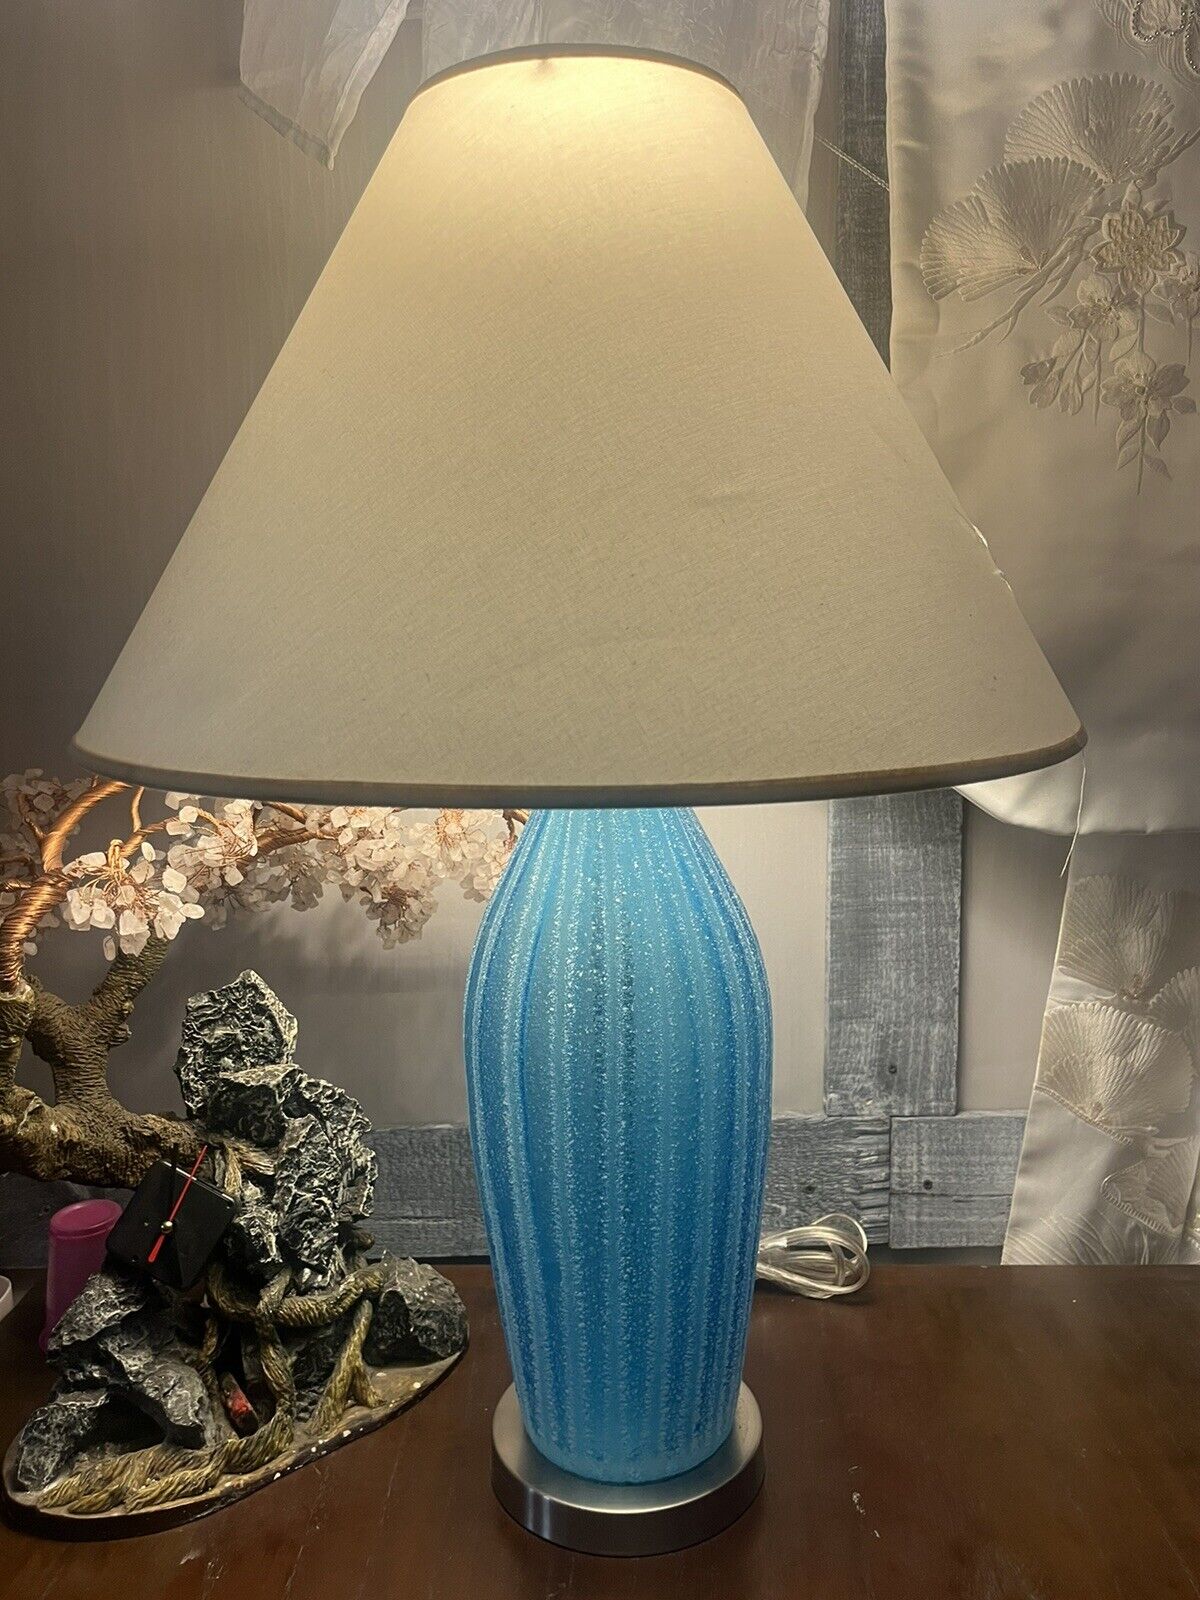 2 Large Gorgeous Blue Aqua Glass Table Lamps white flecked Working Tall